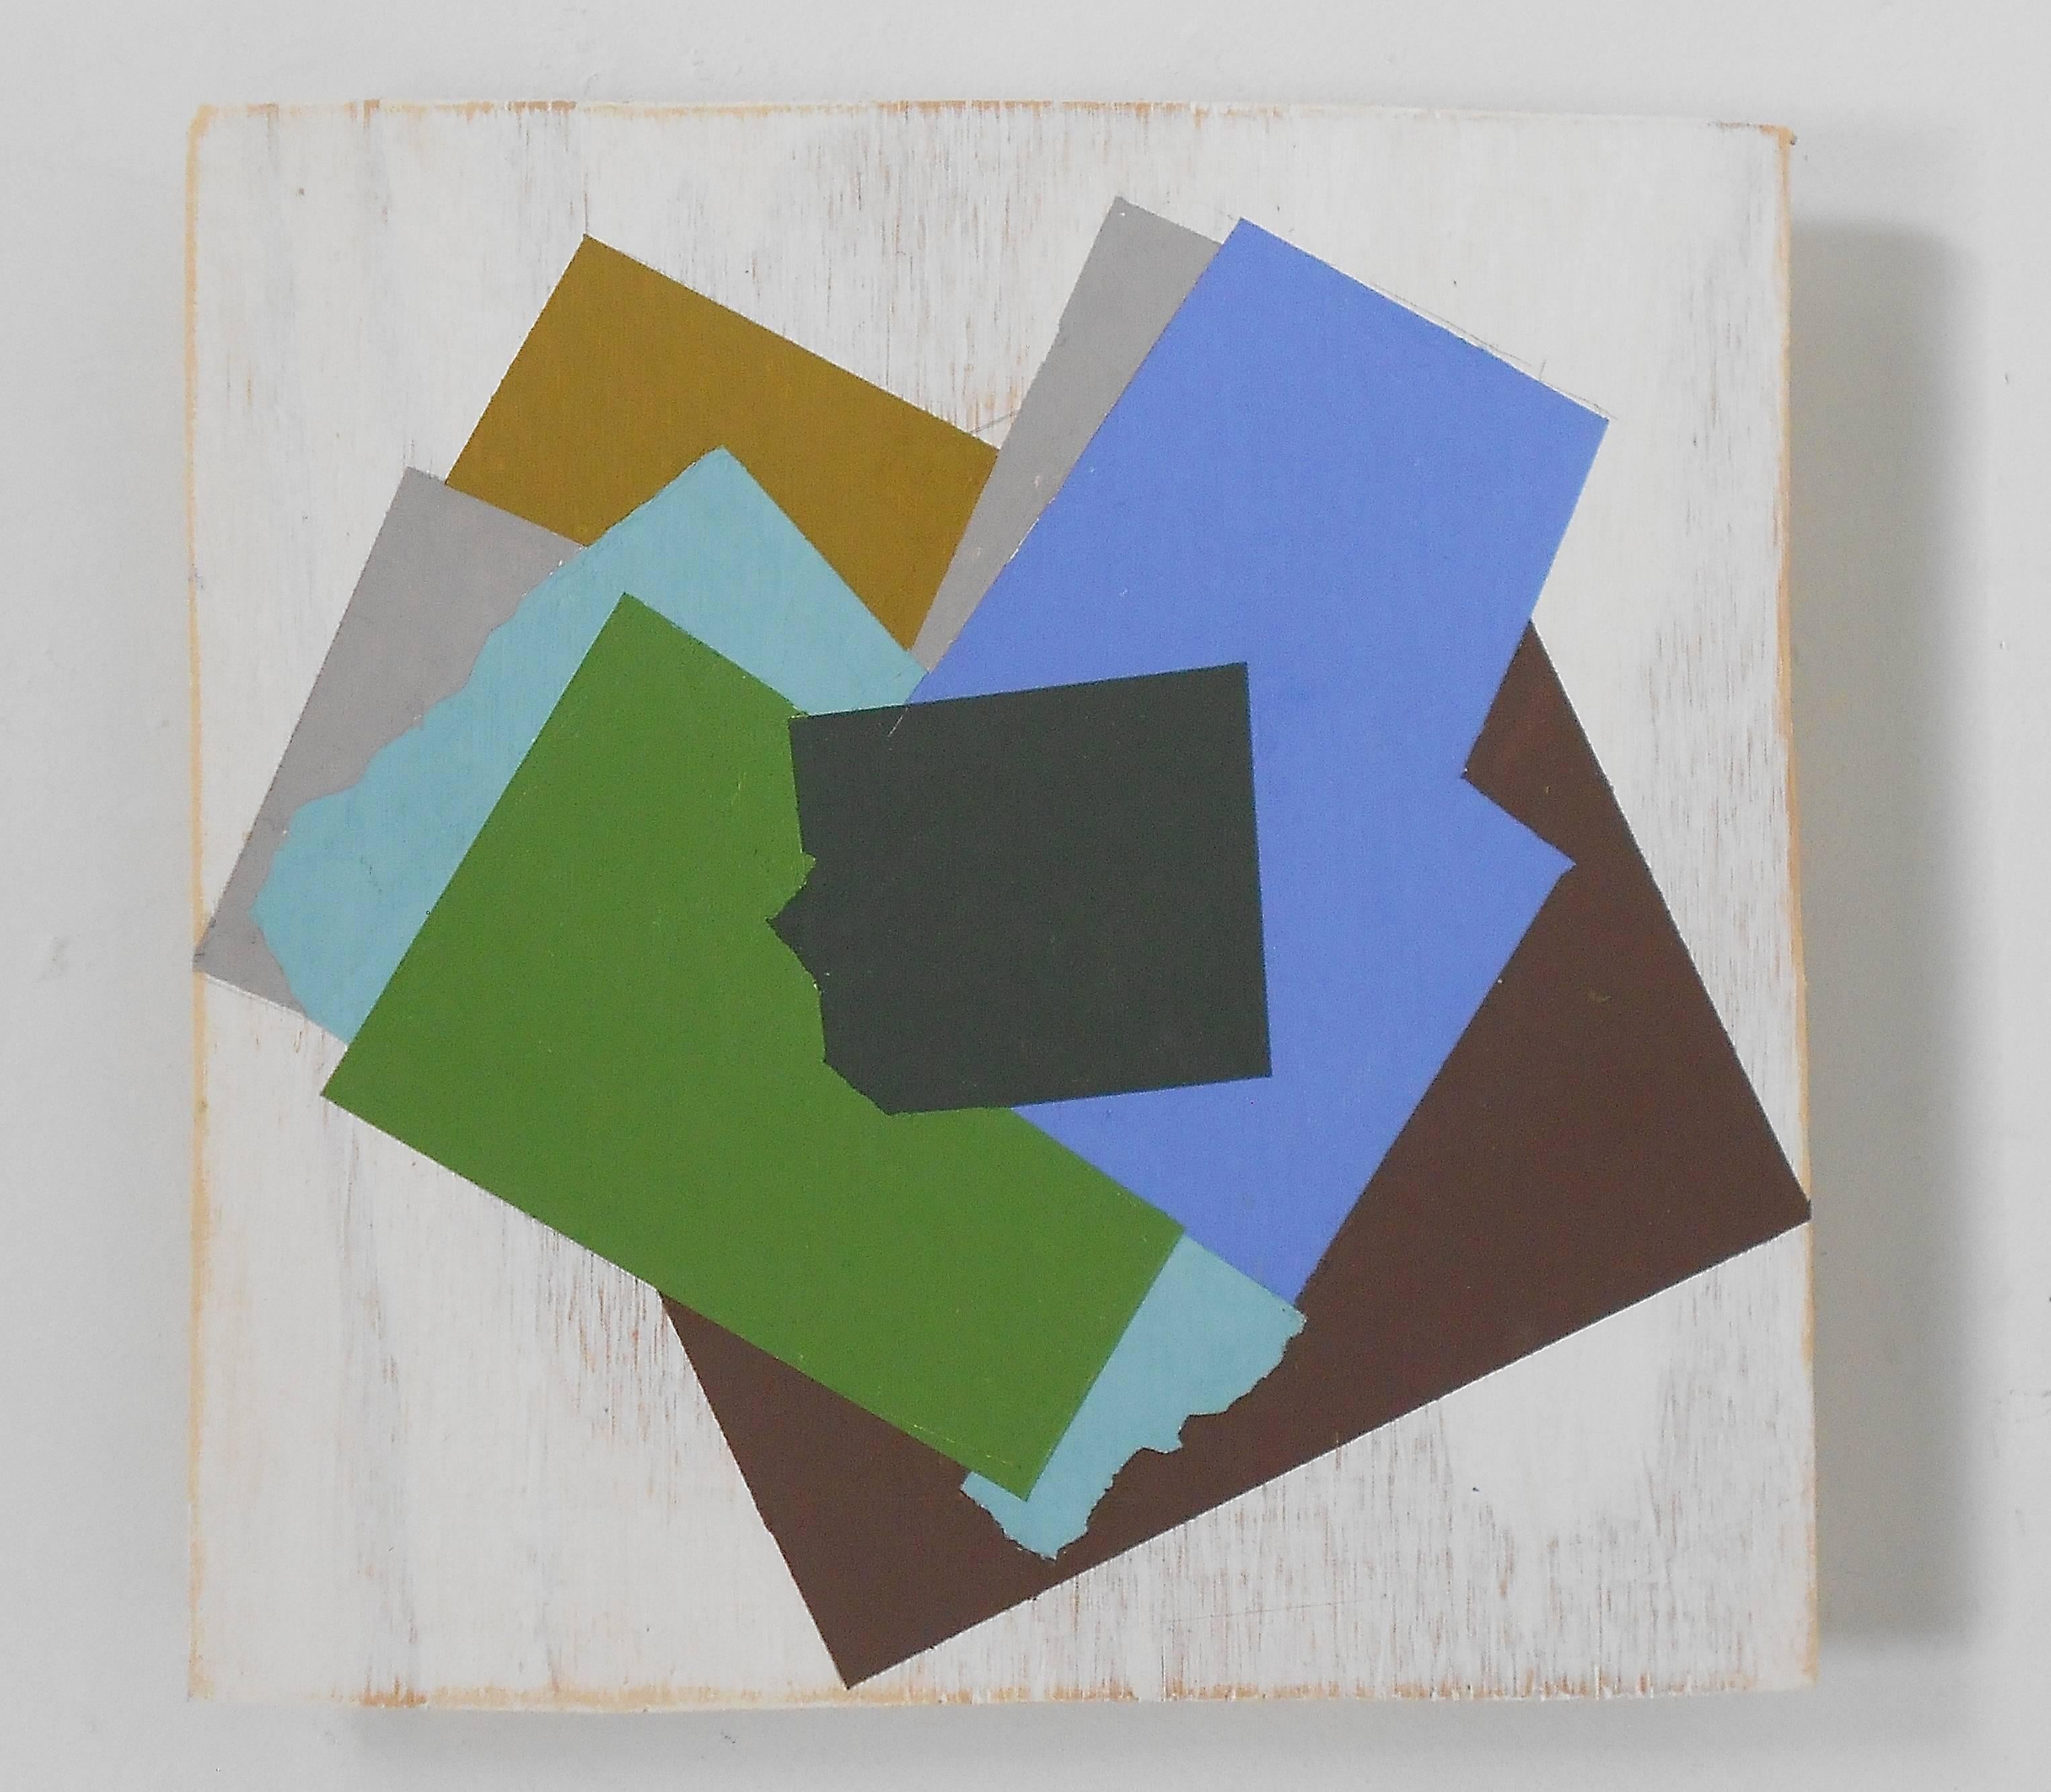 Jean Feinberg Abstract Painting - "Untitled" Geometric Abstract Blue Green Brown Mixed Media Oil on Wood